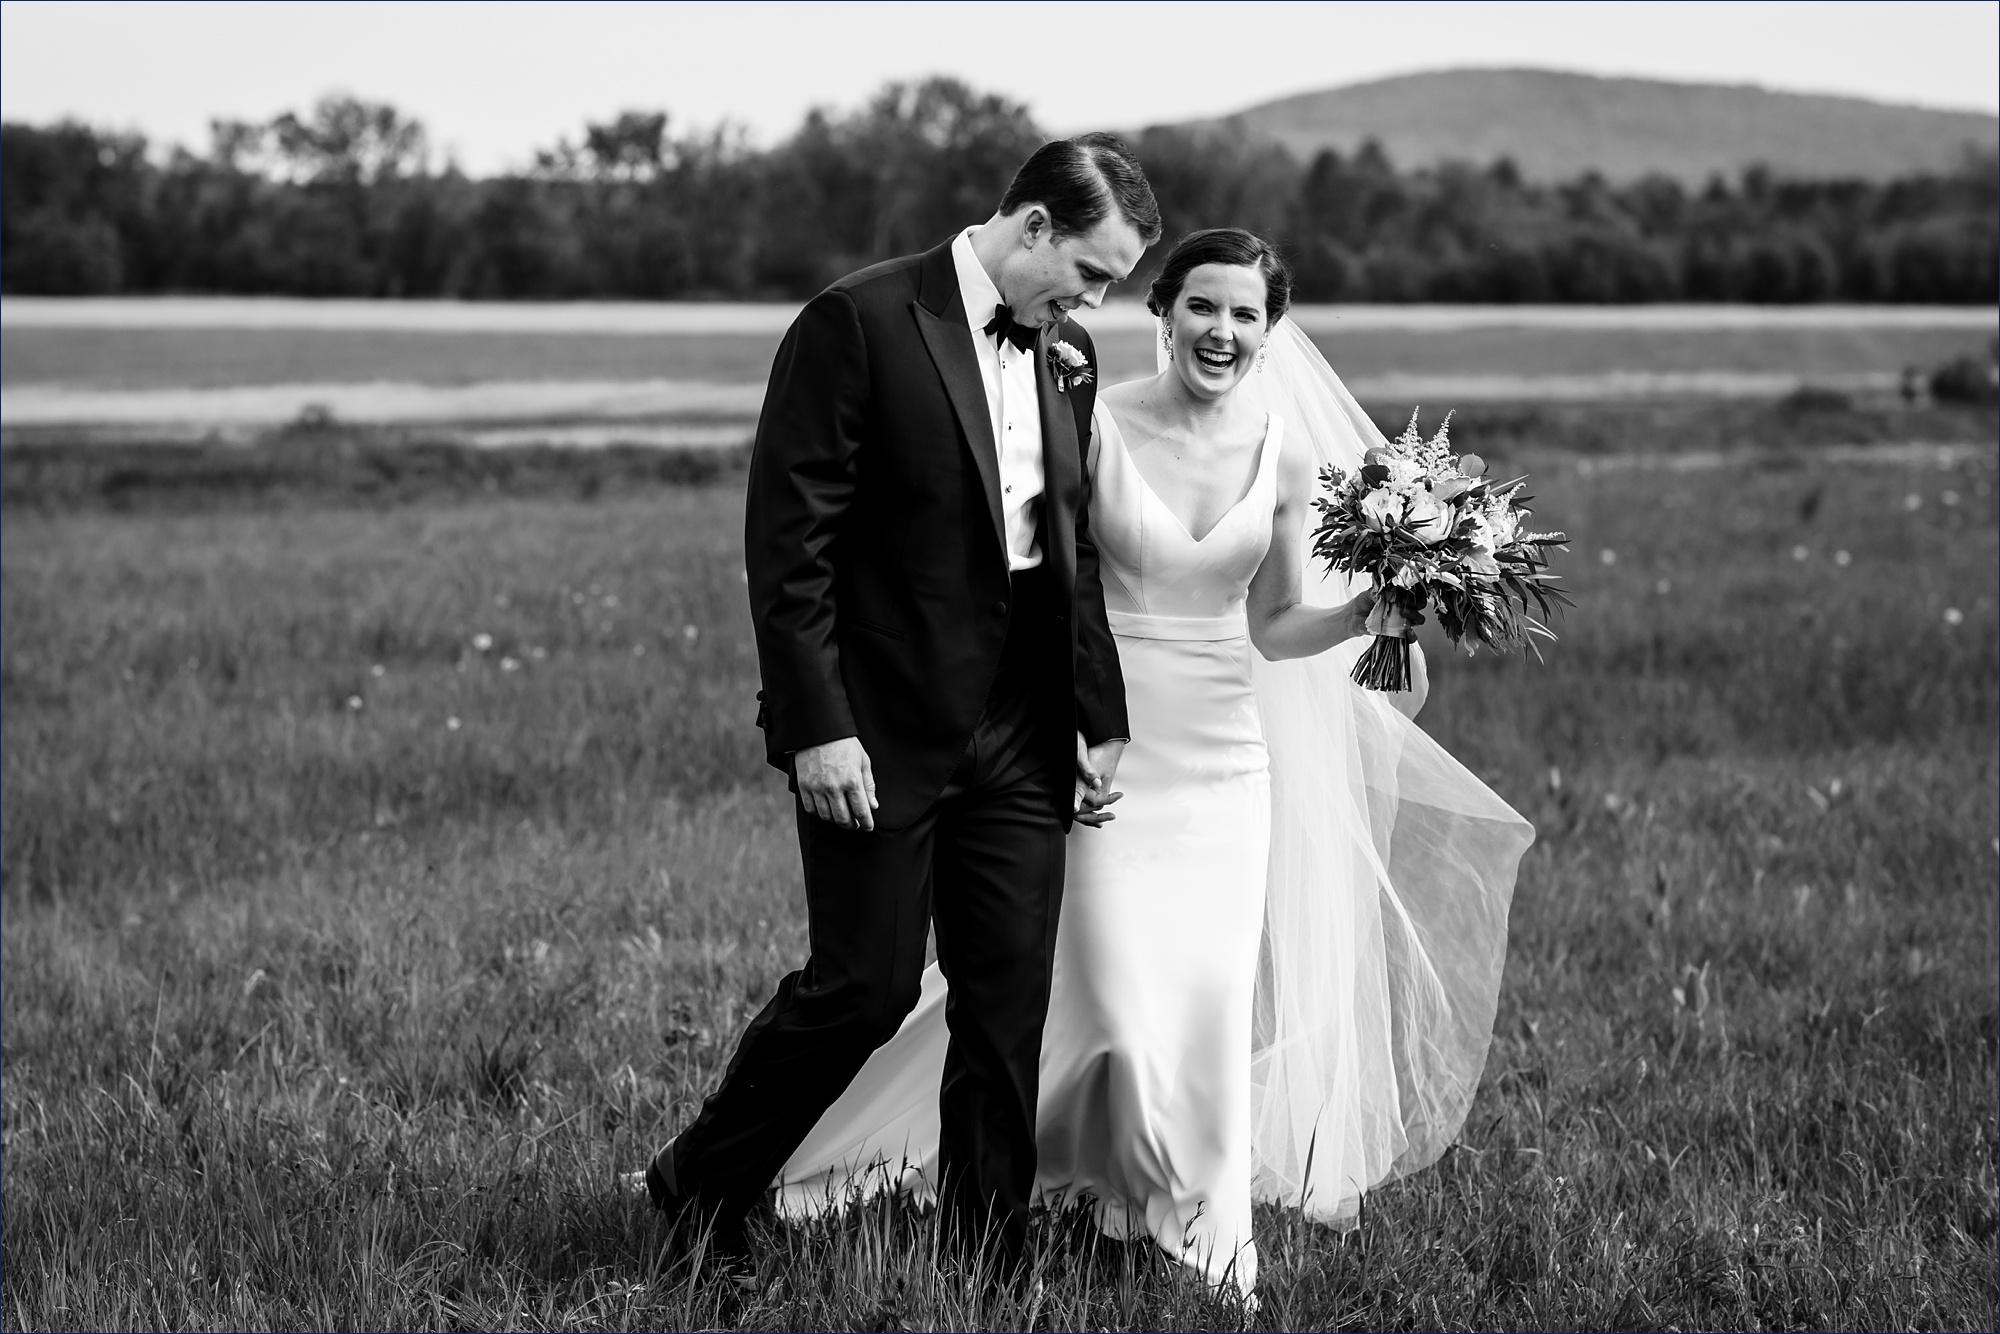 The bride and groom laugh as they walk through the tall grass at the Maine wedding